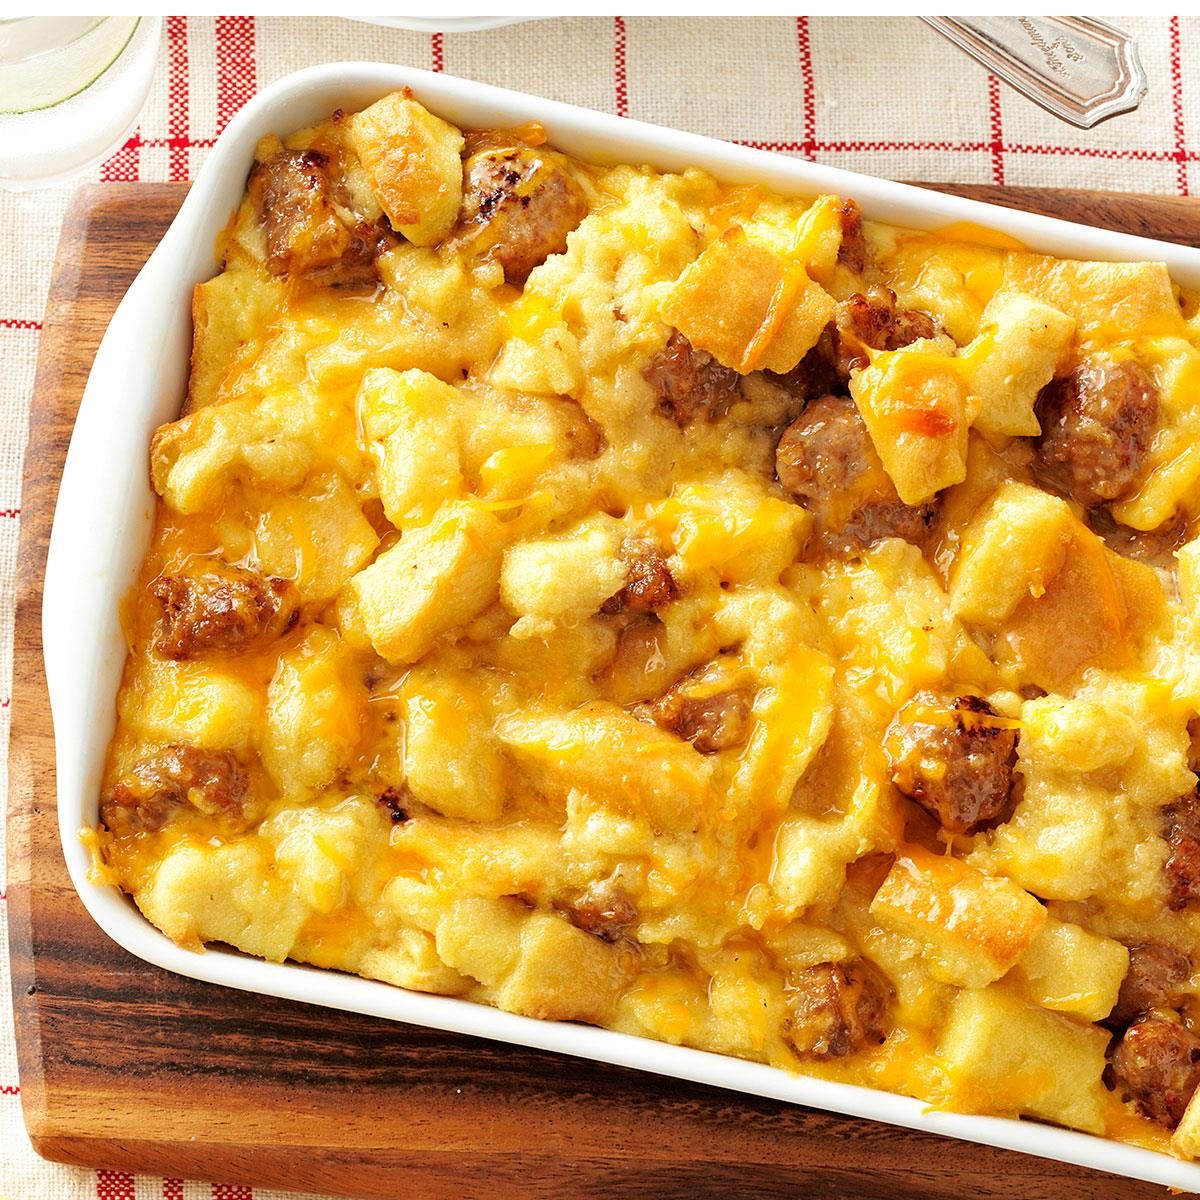 https://www.tasteofhome.com/wp-content/uploads/2018/01/Sausage-and-Egg-Casserole_exps1590_BB133217D05_31_4bC_RMS-1.jpg